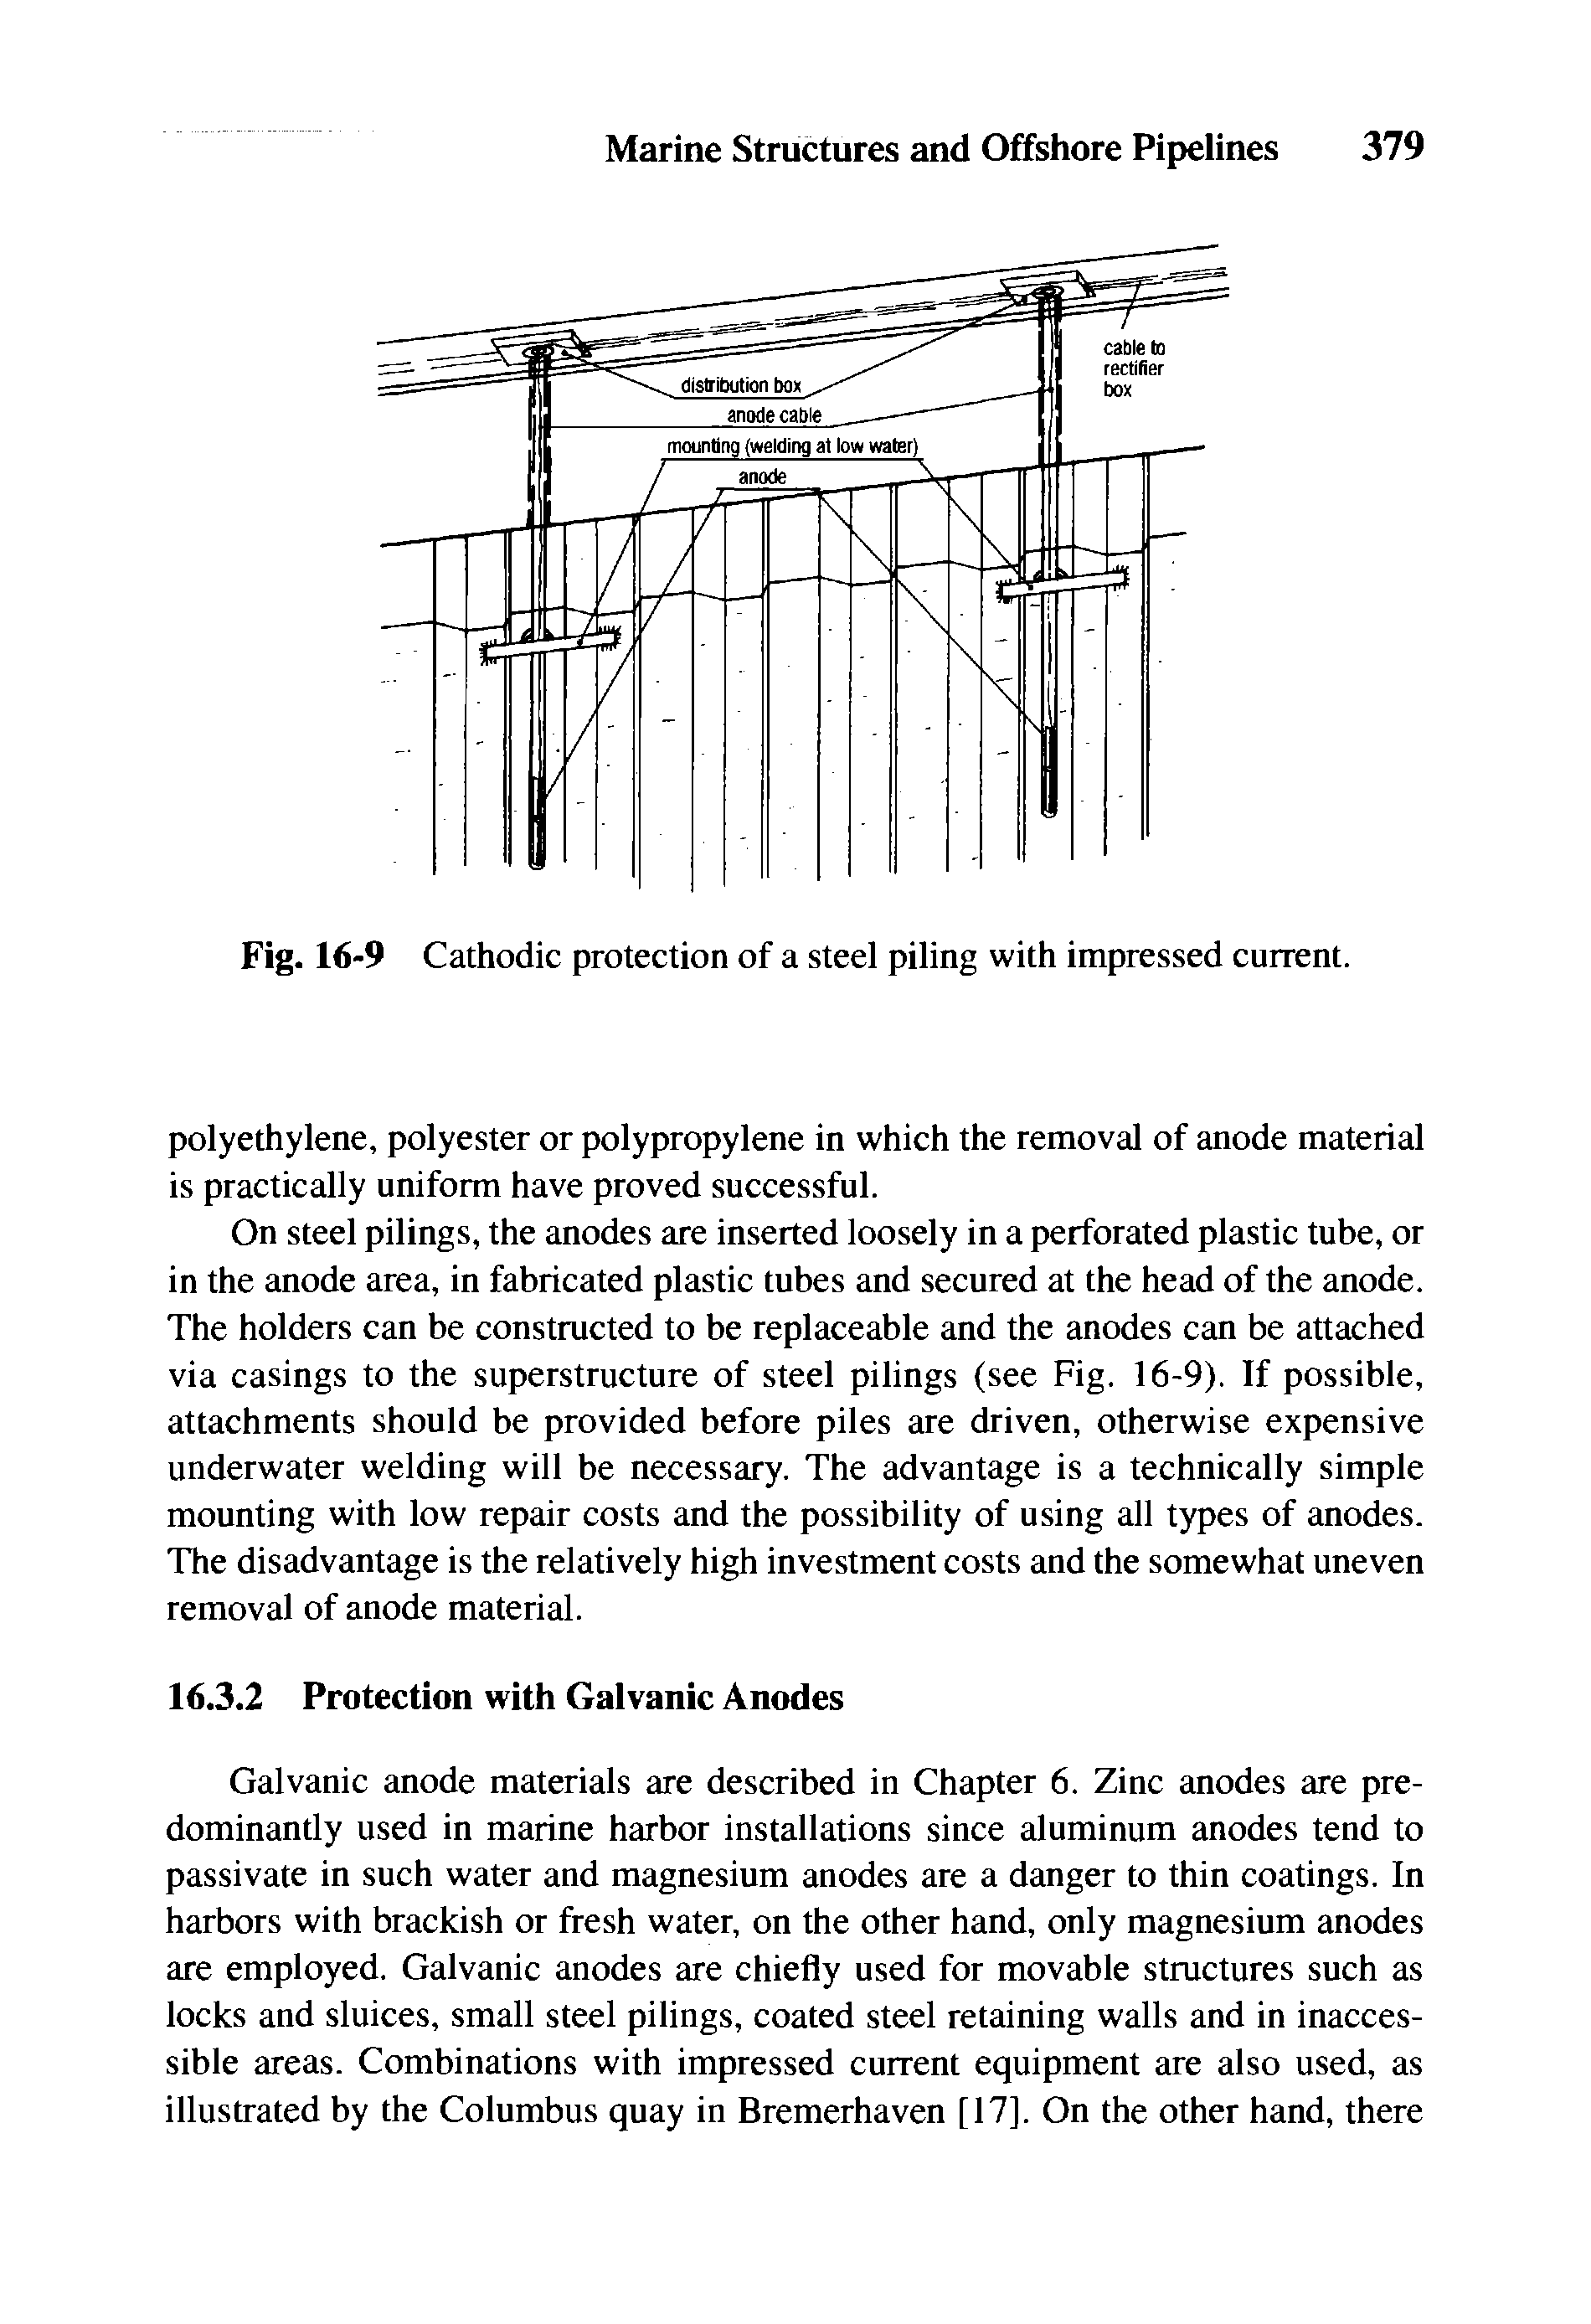 Fig. 16-9 Cathodic protection of a steel piling with impressed current.